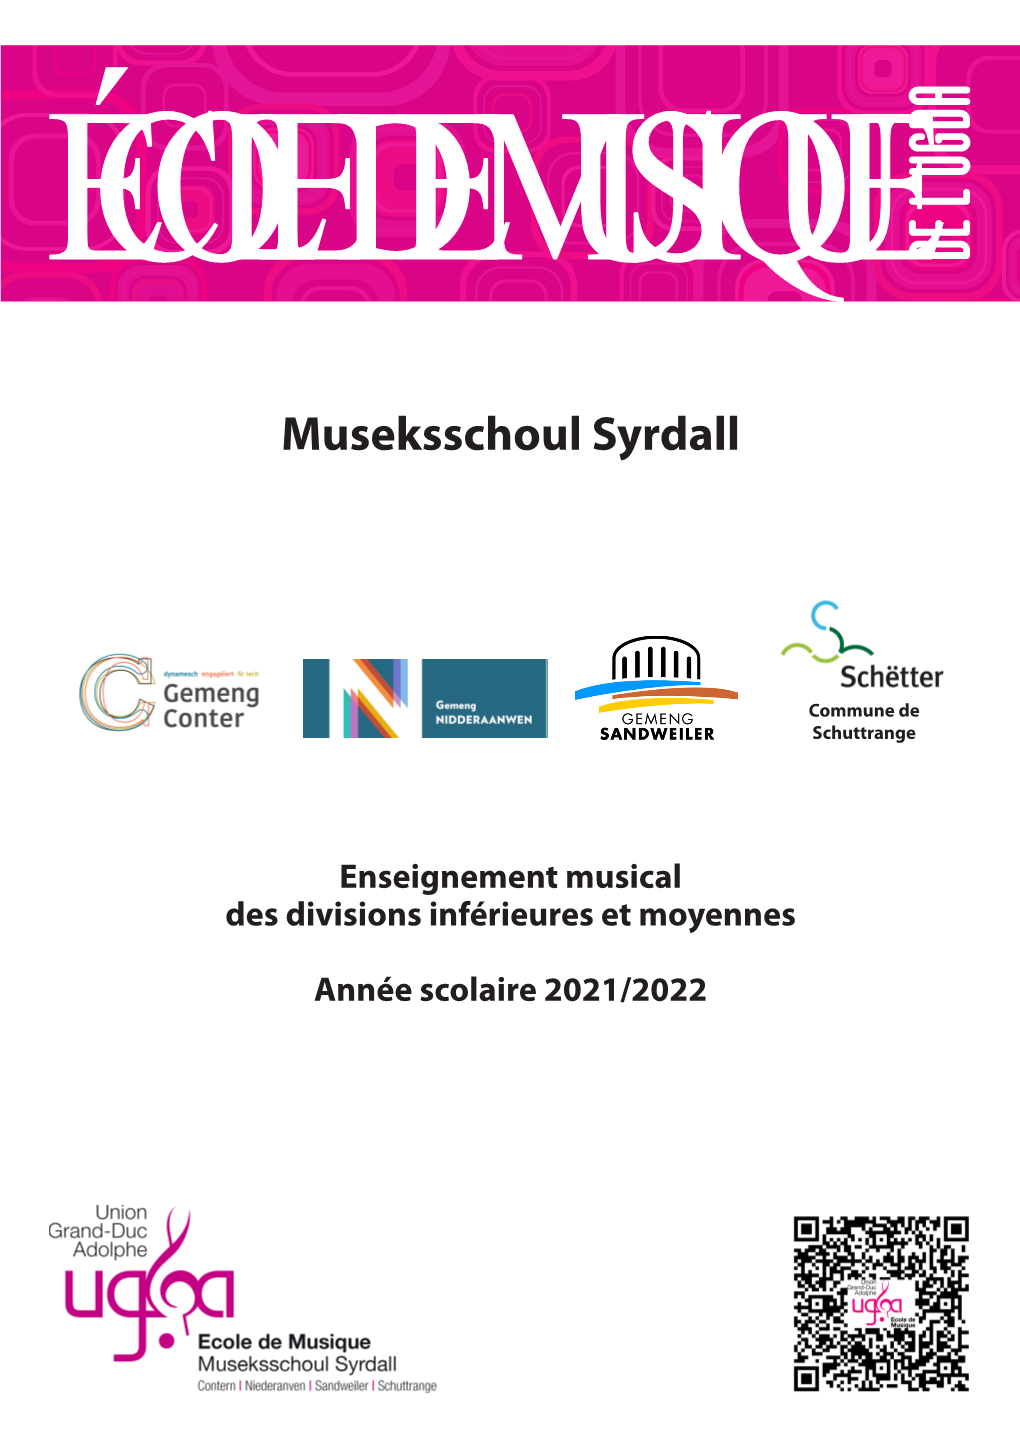 Museksschoul Syrdall